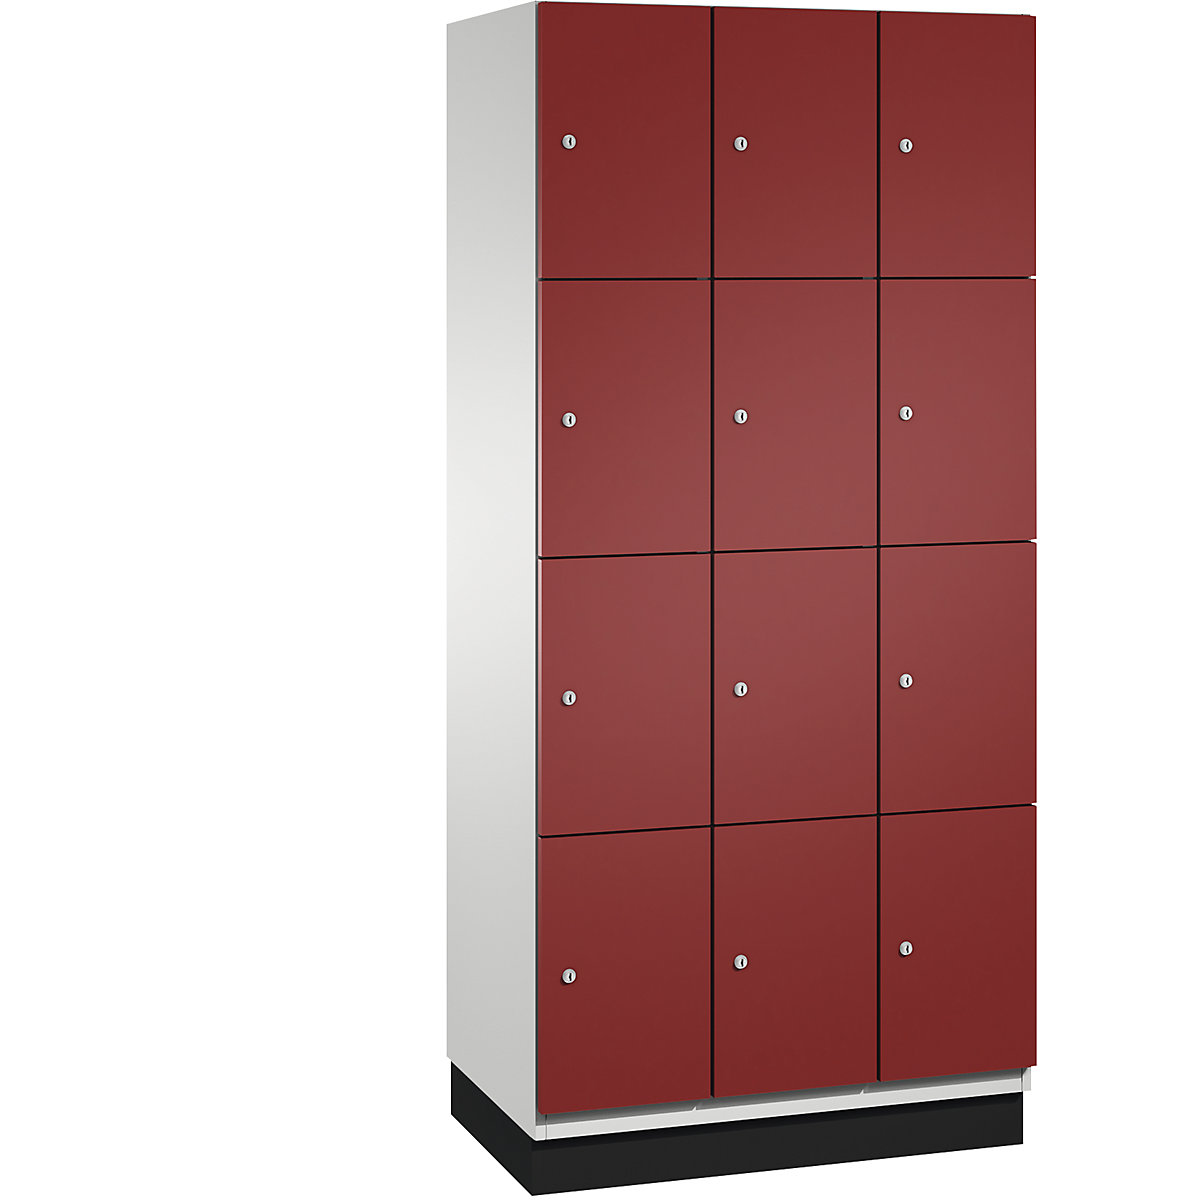 CAMBIO compartment locker with sheet steel doors – C+P, 12 compartments, width 900 mm, body light grey / door ruby red-10